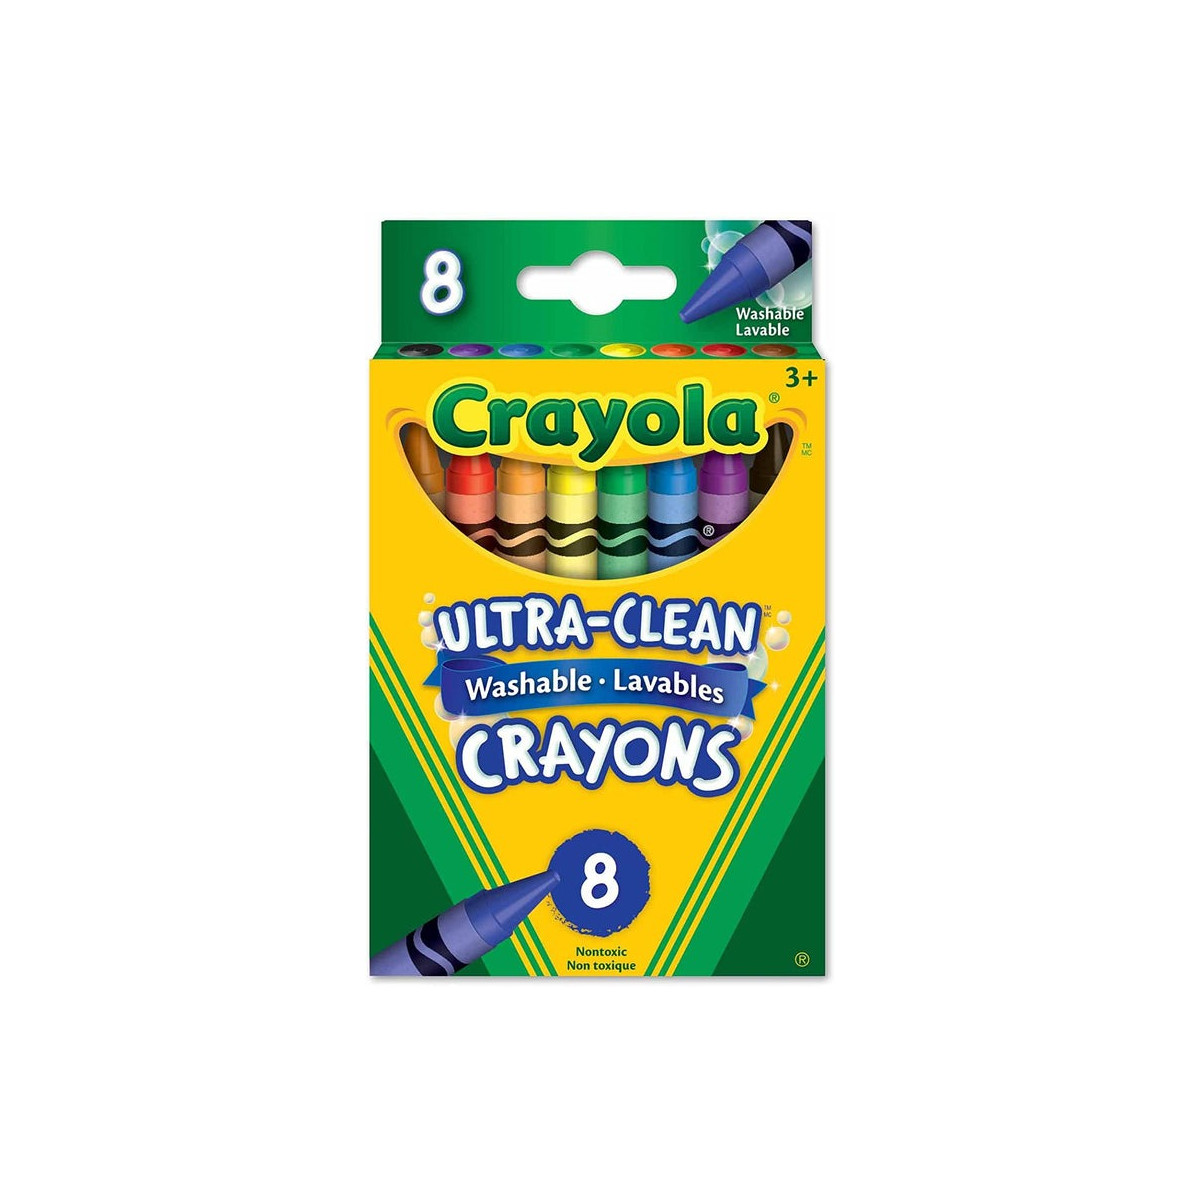 Crayola Broad Line Markers Classic Colors